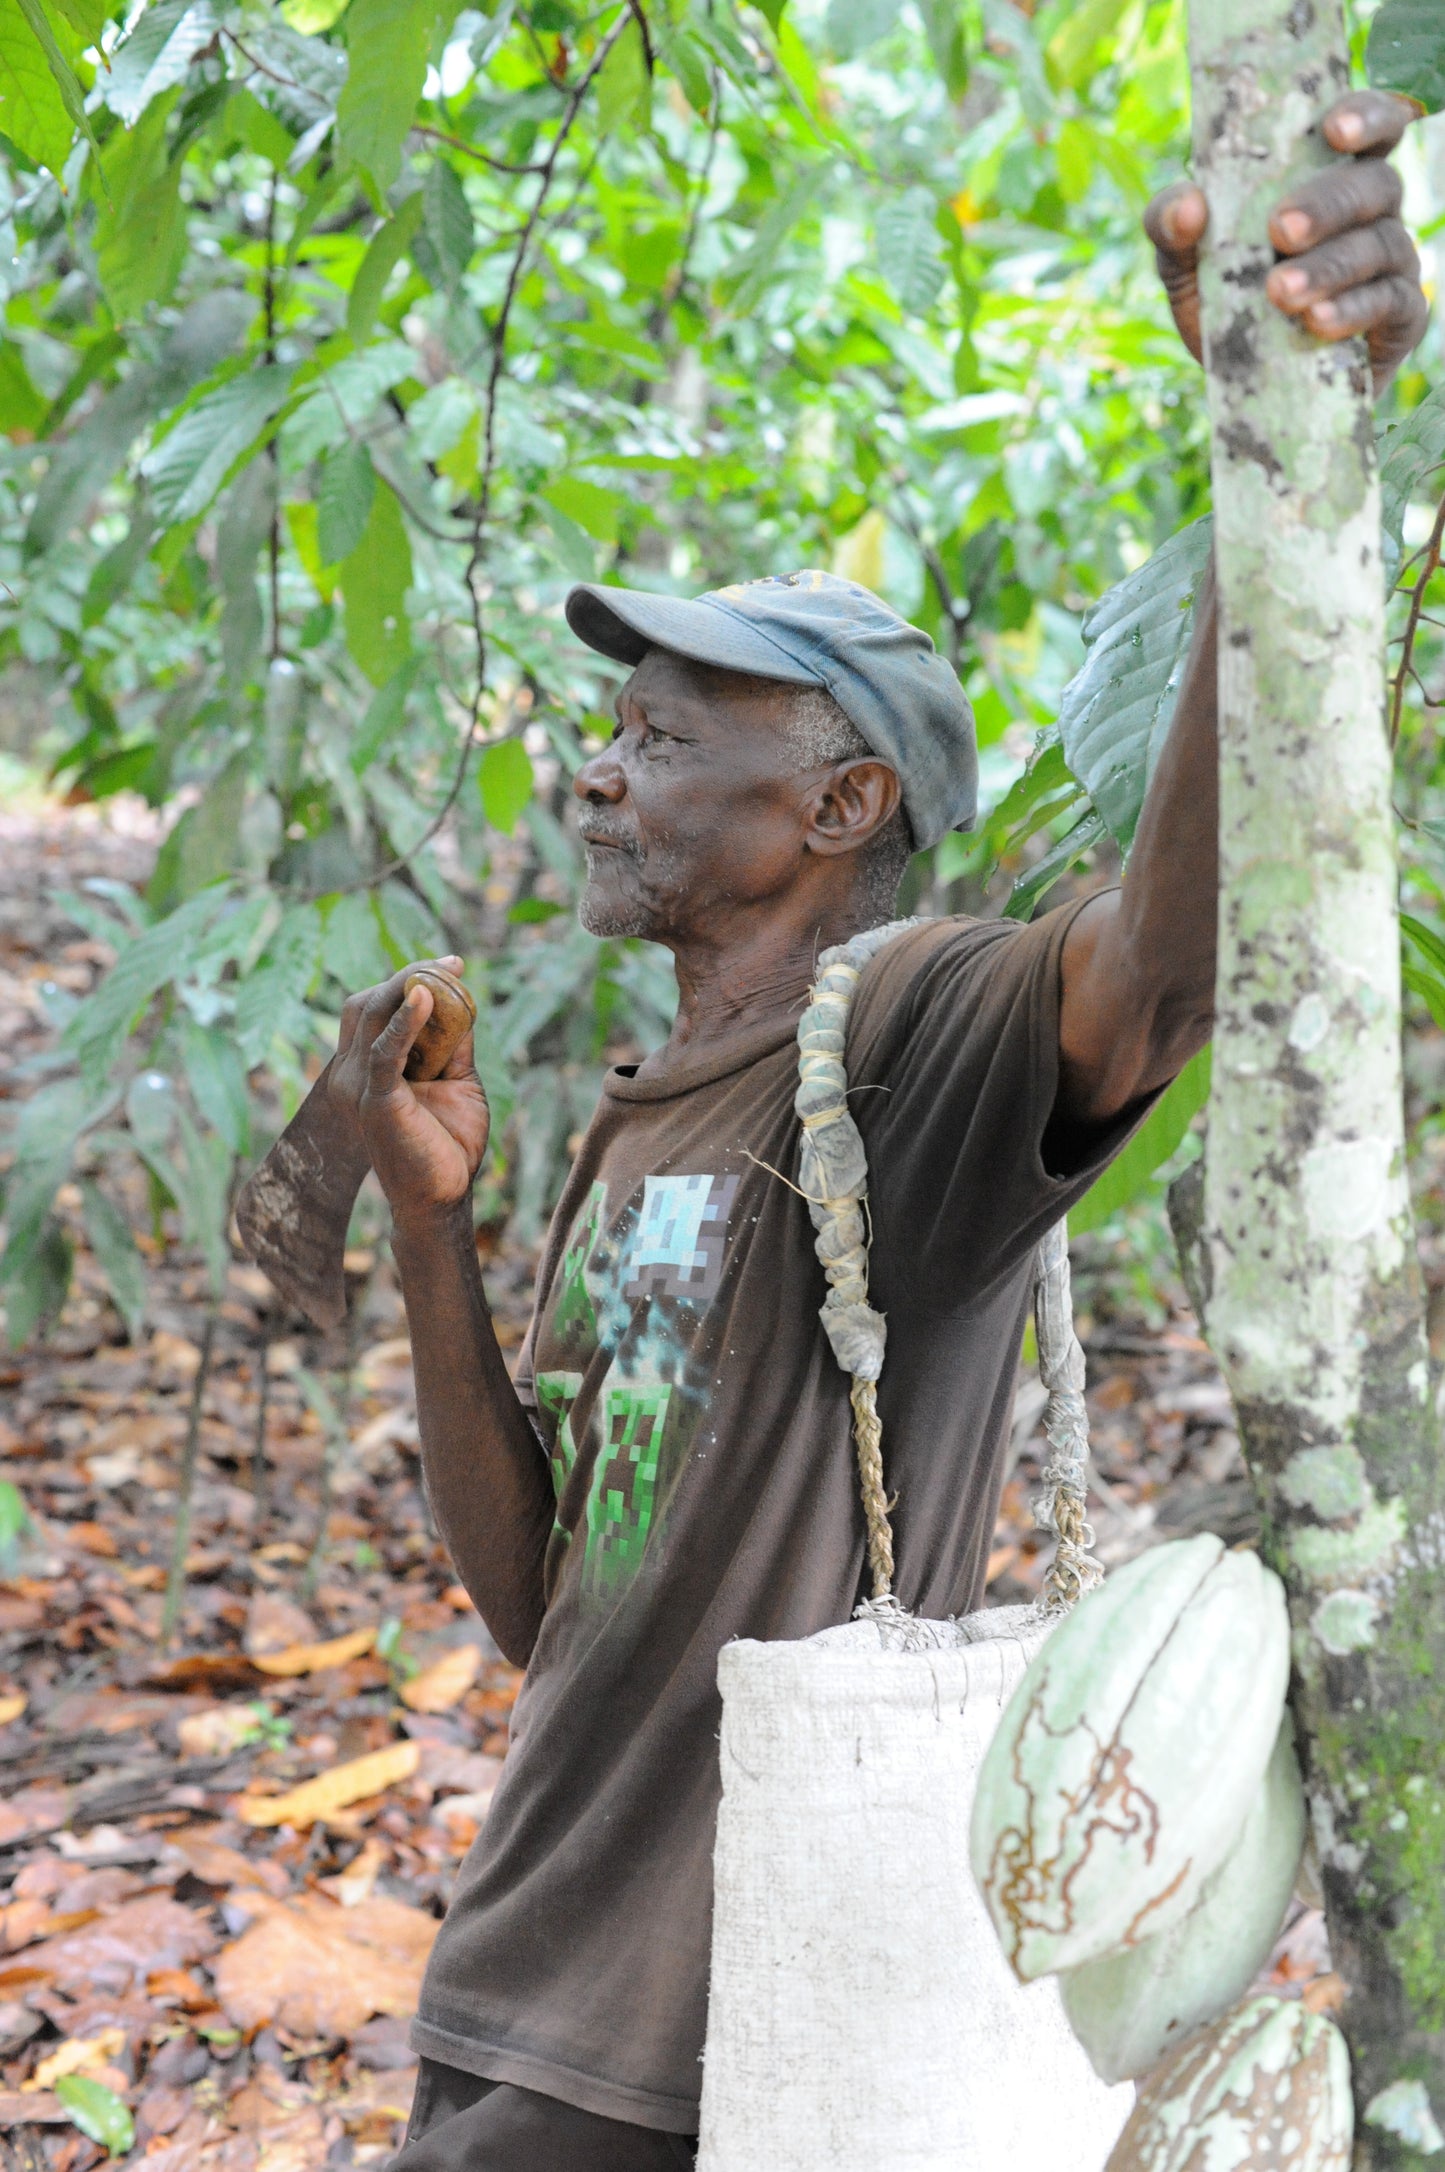 We buy our Haitian cacao directly from 3,000 local farmers in Haiti 